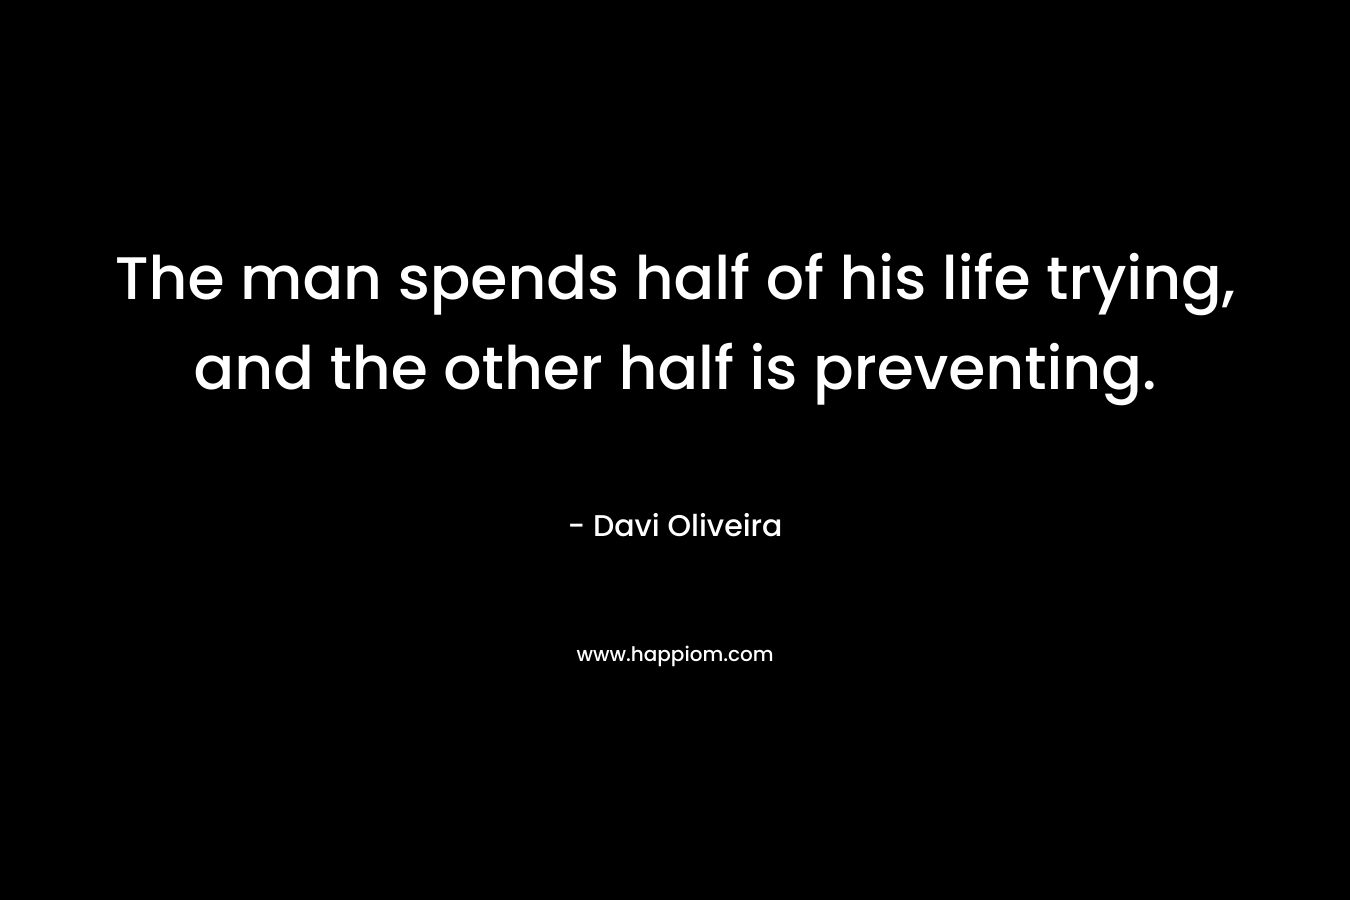 The man spends half of his life trying, and the other half is preventing. – Davi Oliveira